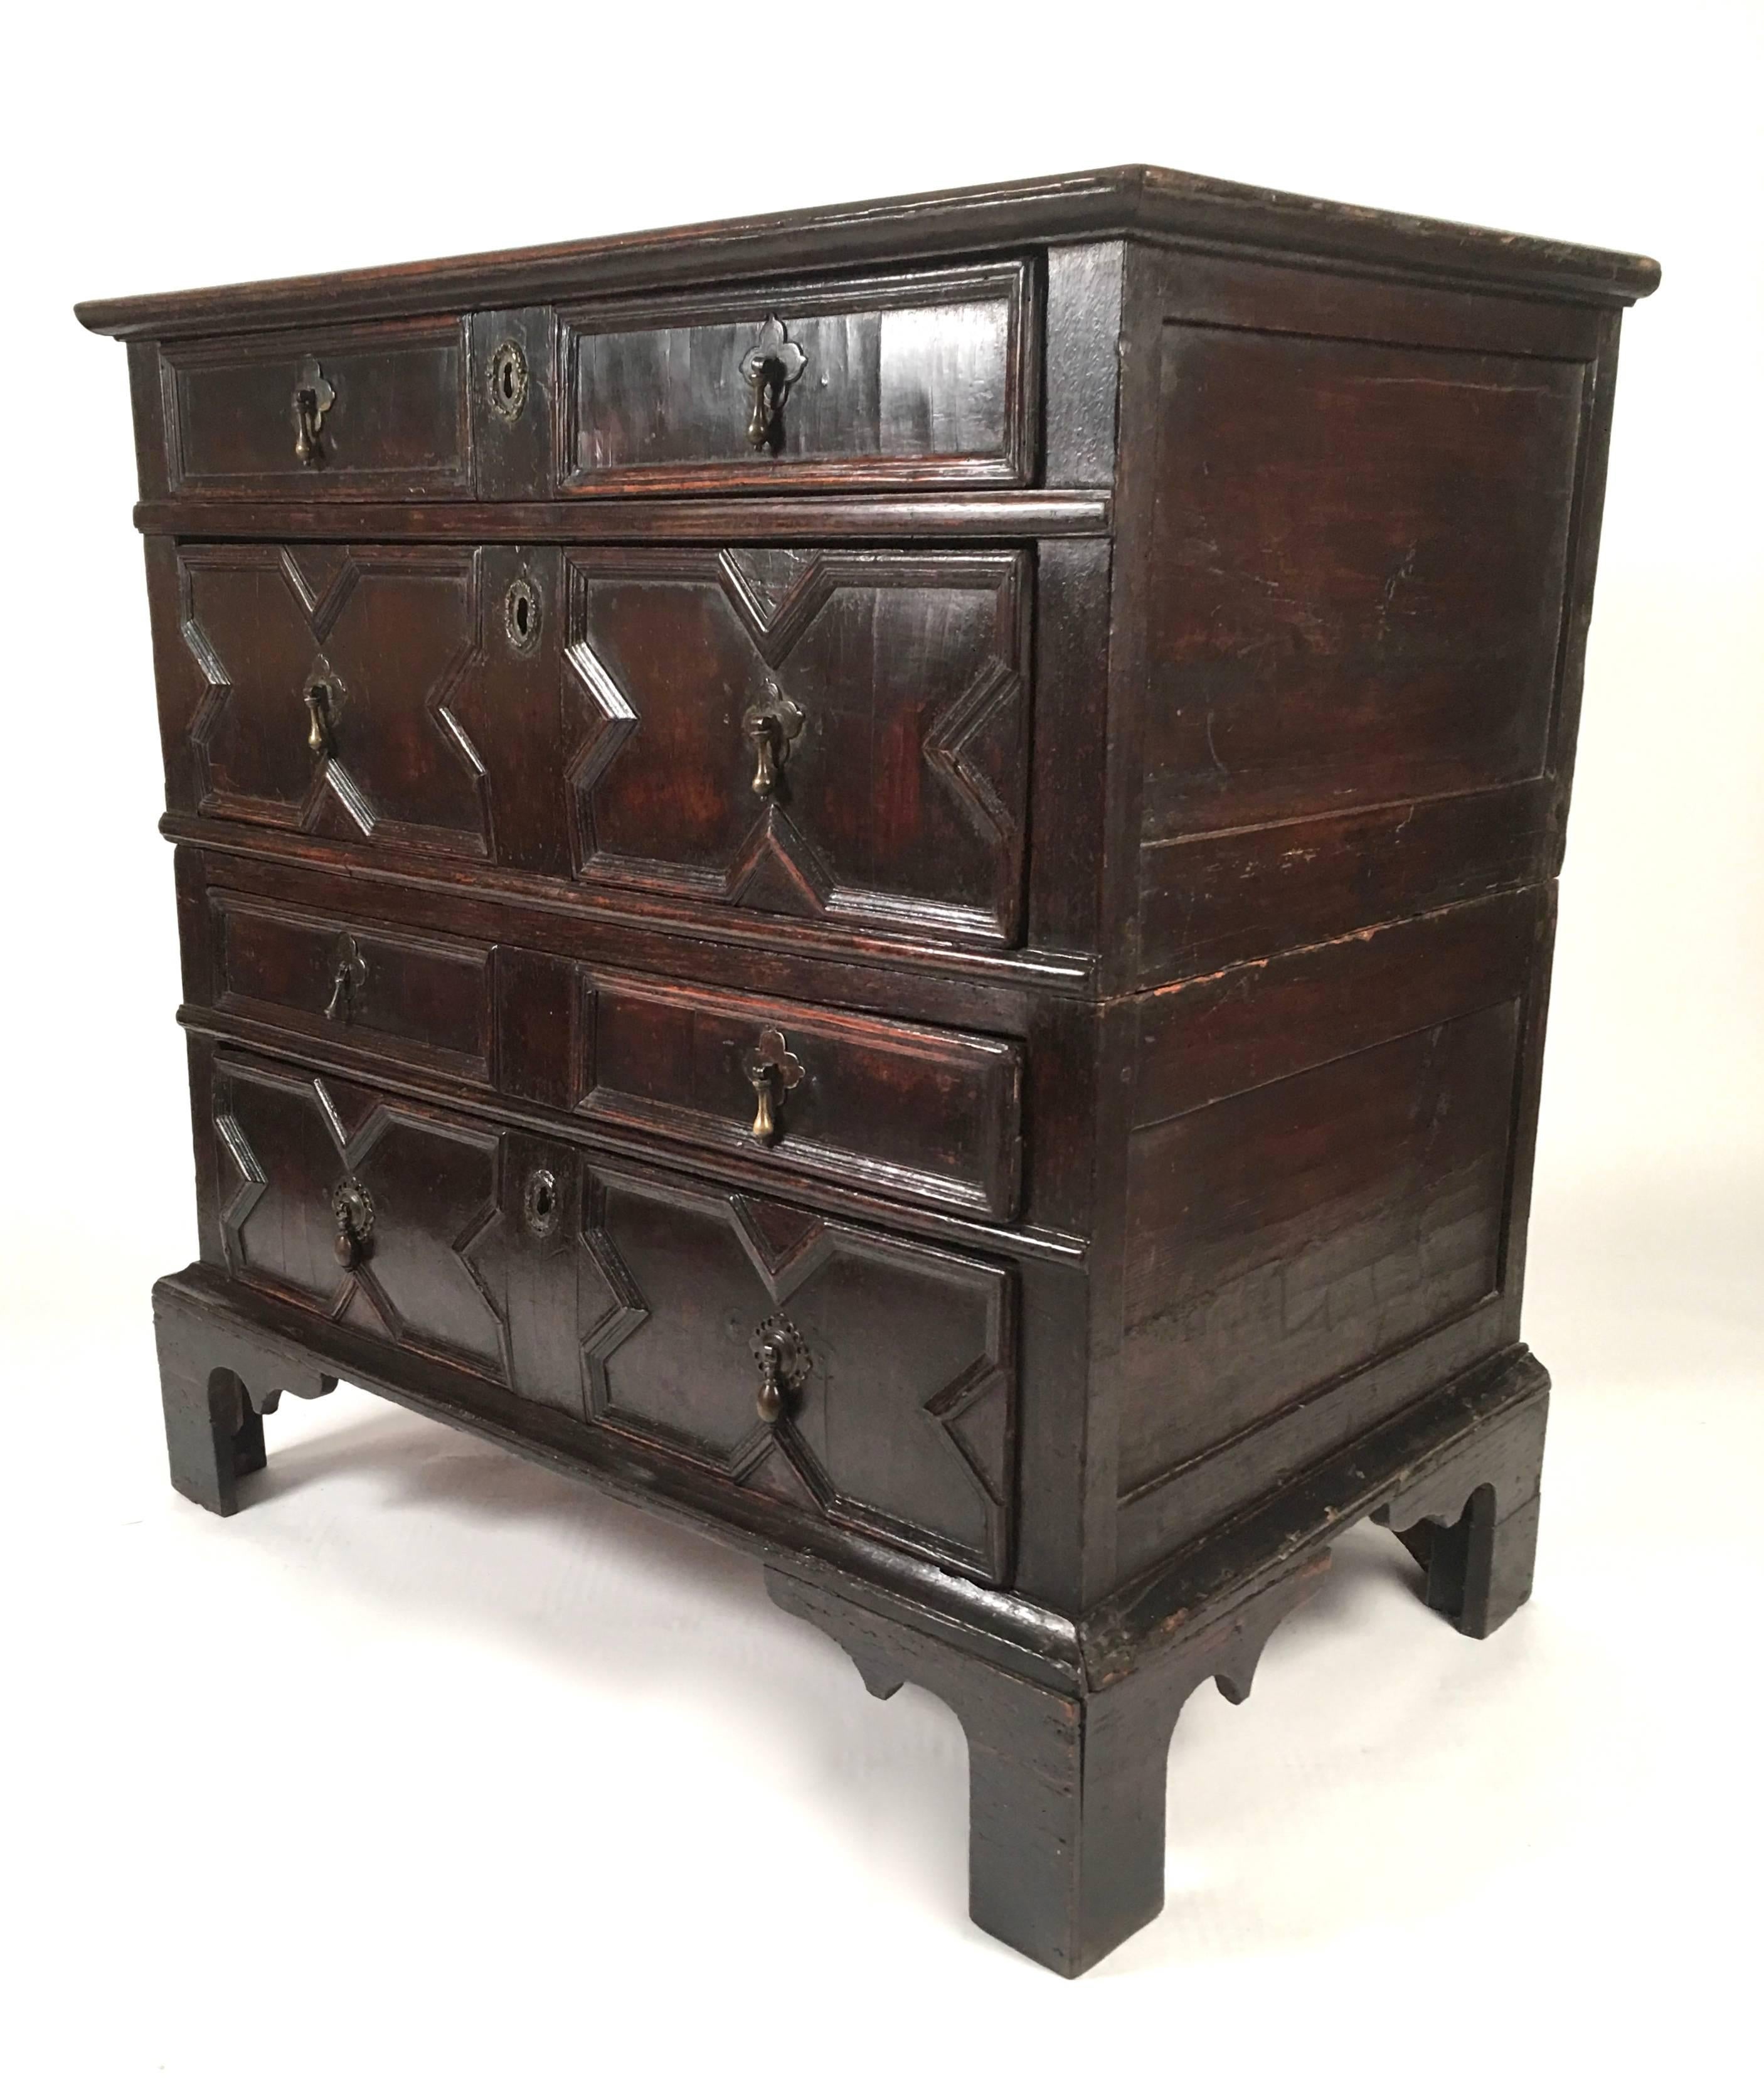 A Charles II carved oak chest of drawers, the rectangular top above four drawers in graduated sizes, with carved geometric moldings and brass drop drawer pulls, on later bracket feet, with English, 17th century. 
This chest of drawers comes apart in